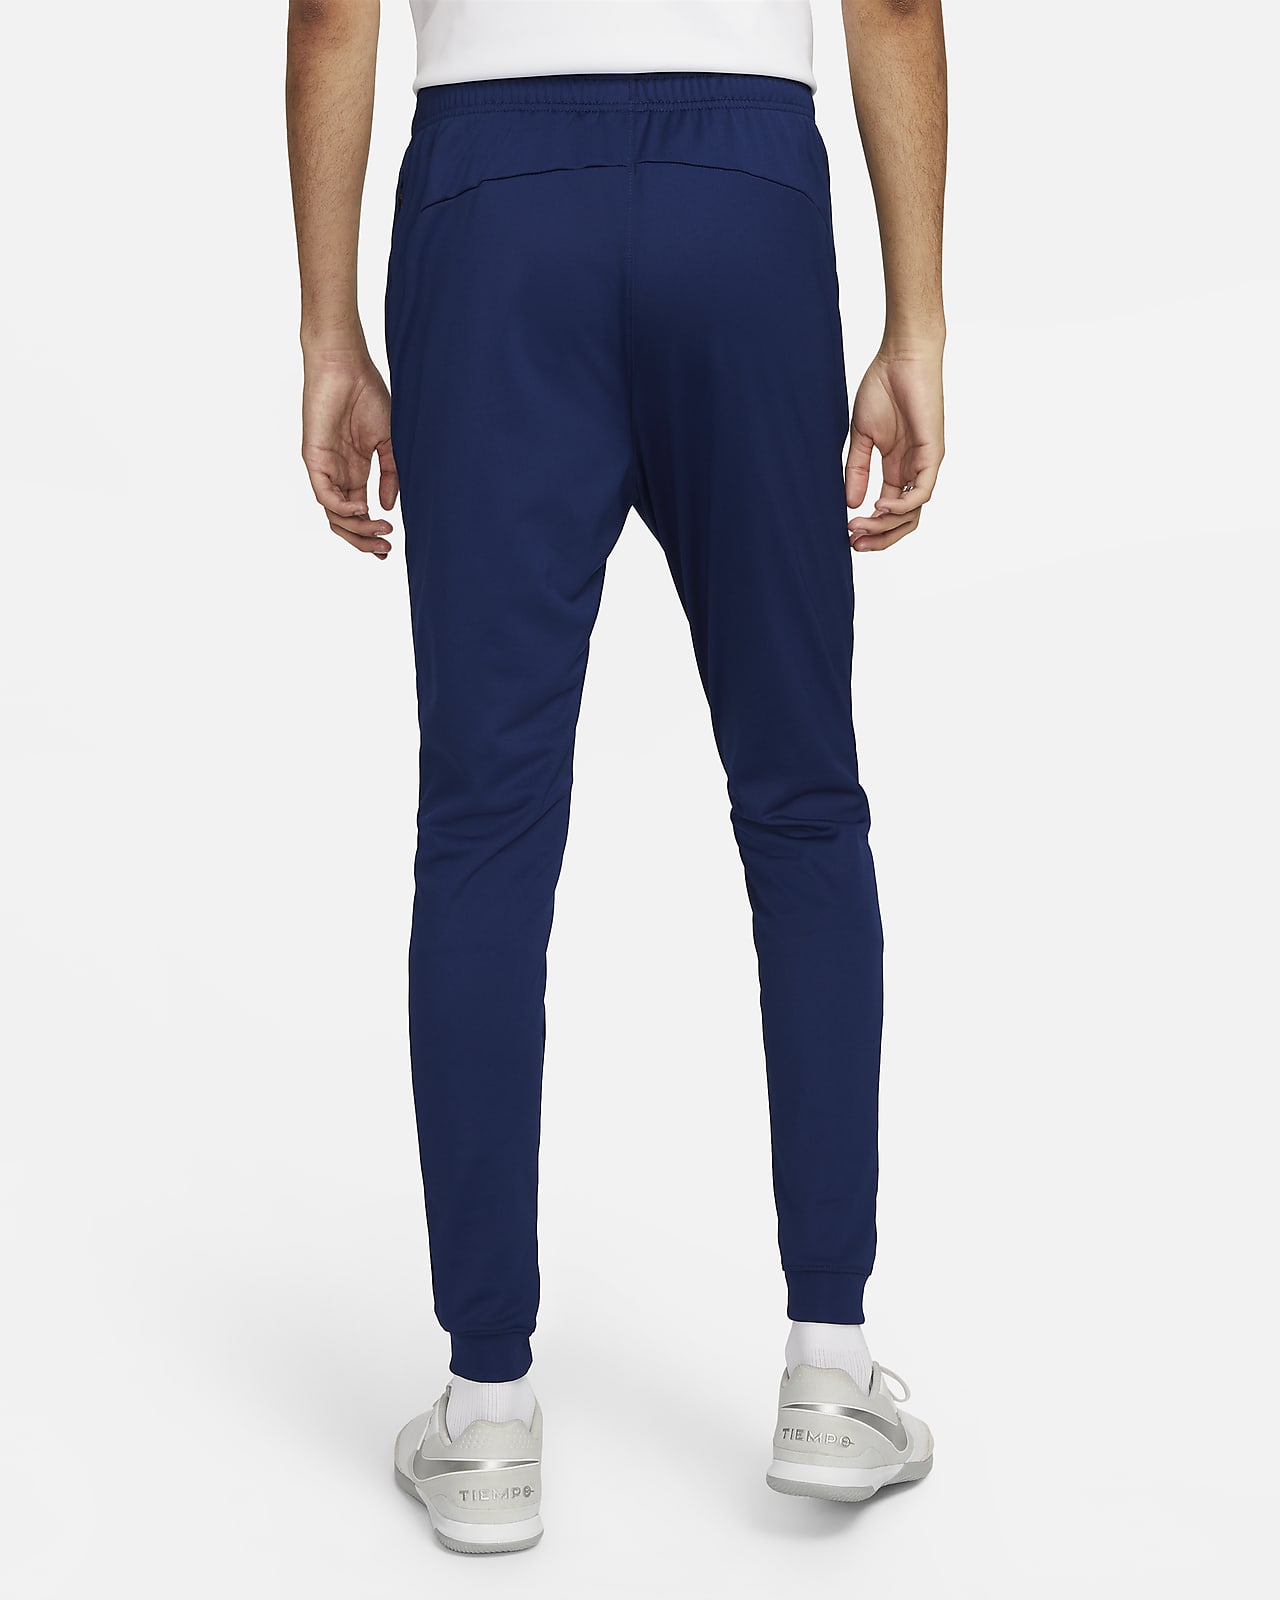 Buy Blue Track Pants for Men by PERFORMAX Online | Ajio.com-cheohanoi.vn